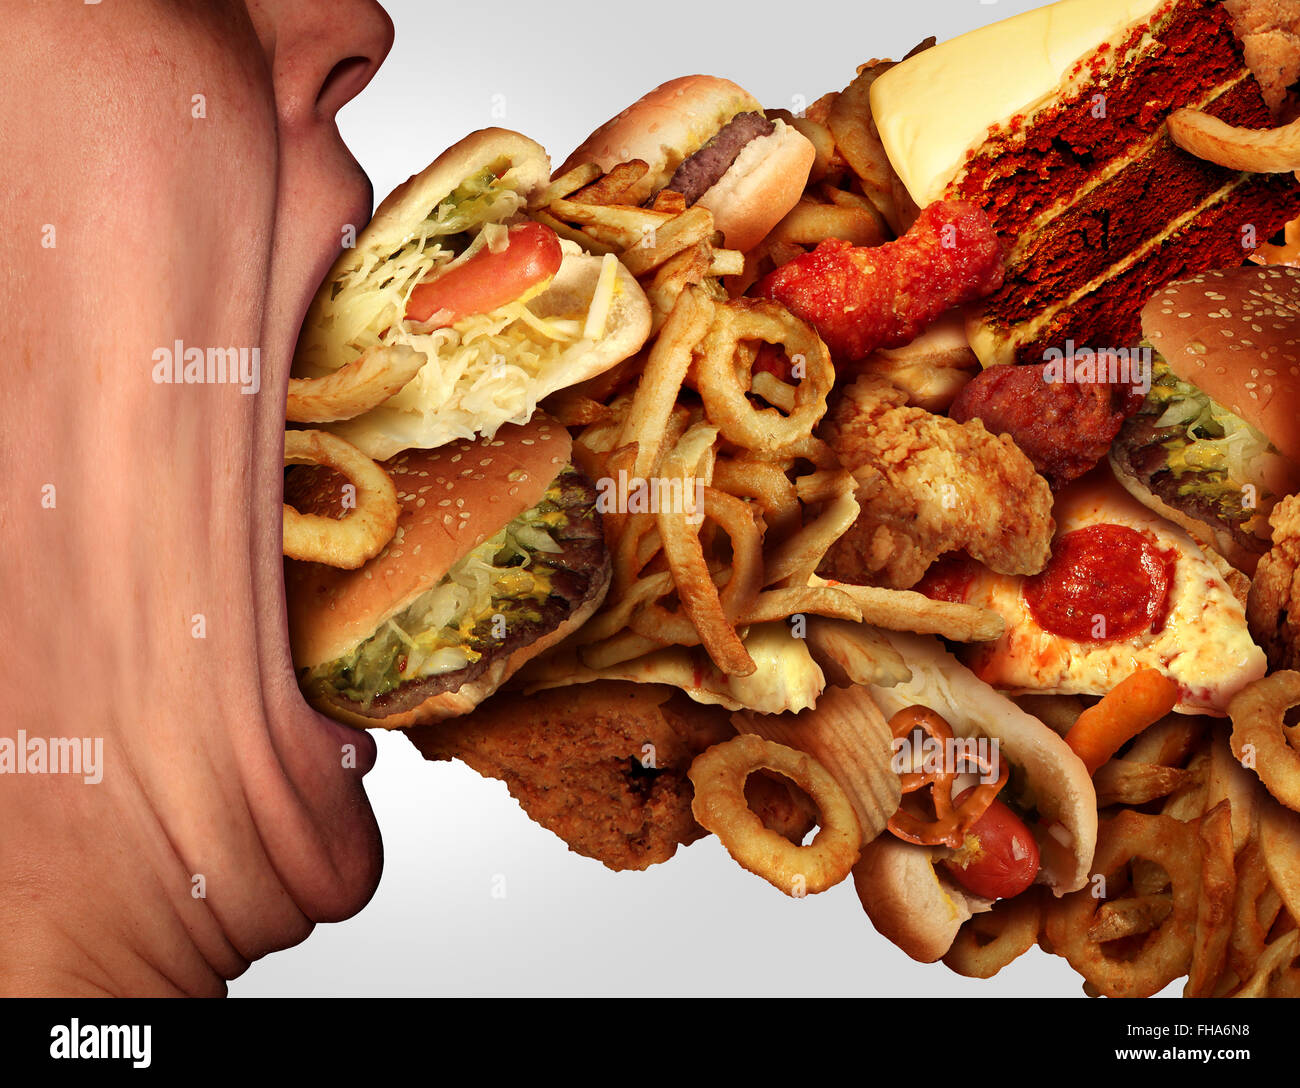 Eating junk food nutrition and dietary health problem concept as a person with a big wide open mouth feasting on an excessive huge group of unhealthy fast food and snacks. Stock Photo